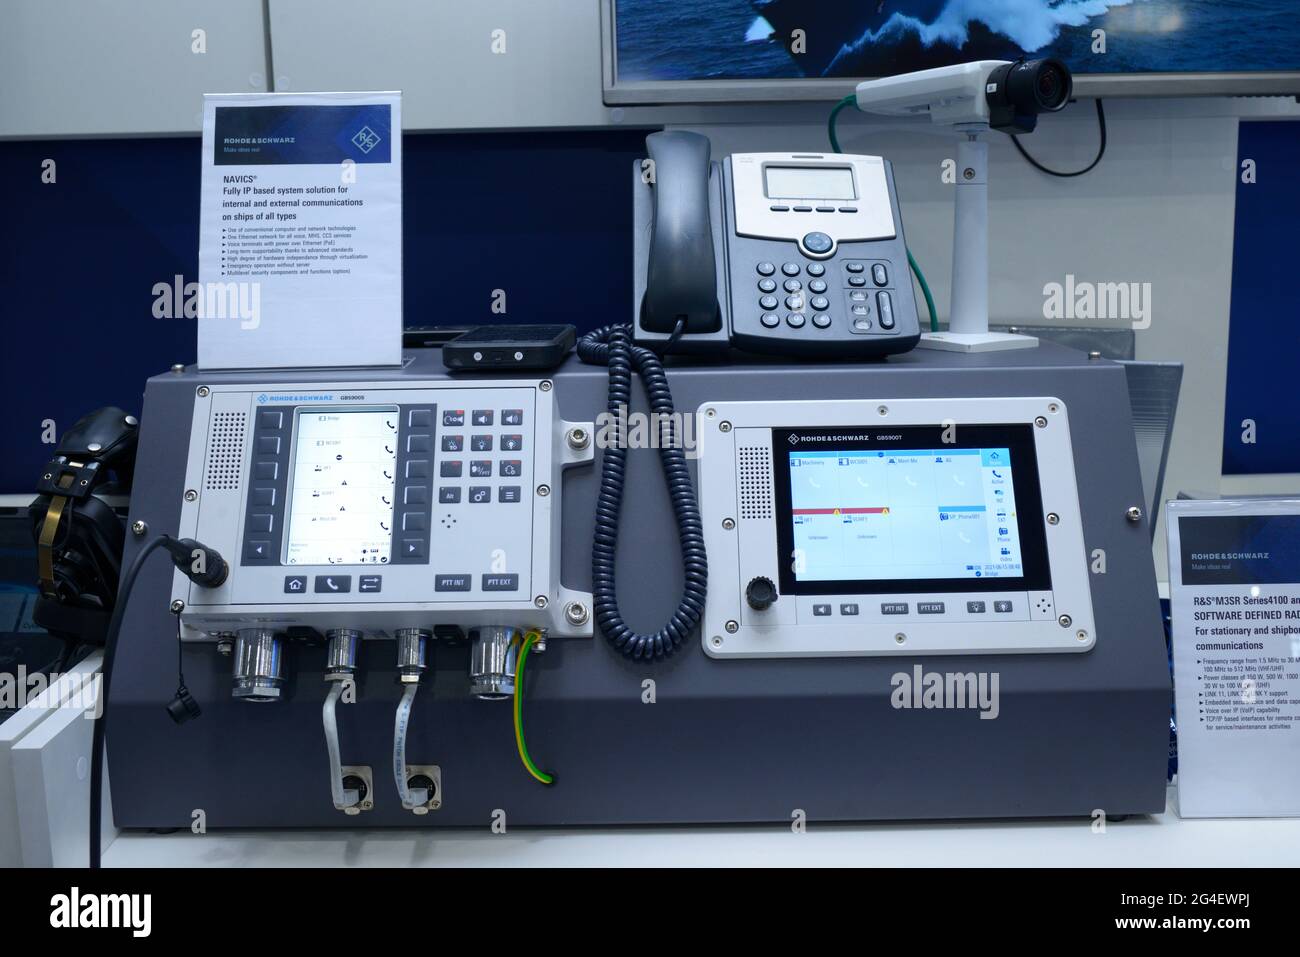 Control panel of a radio station for internal and external communications on ships, made by Rohde Schwartz. Arms and Safety Exhibition. June 15, 2021. Stock Photo